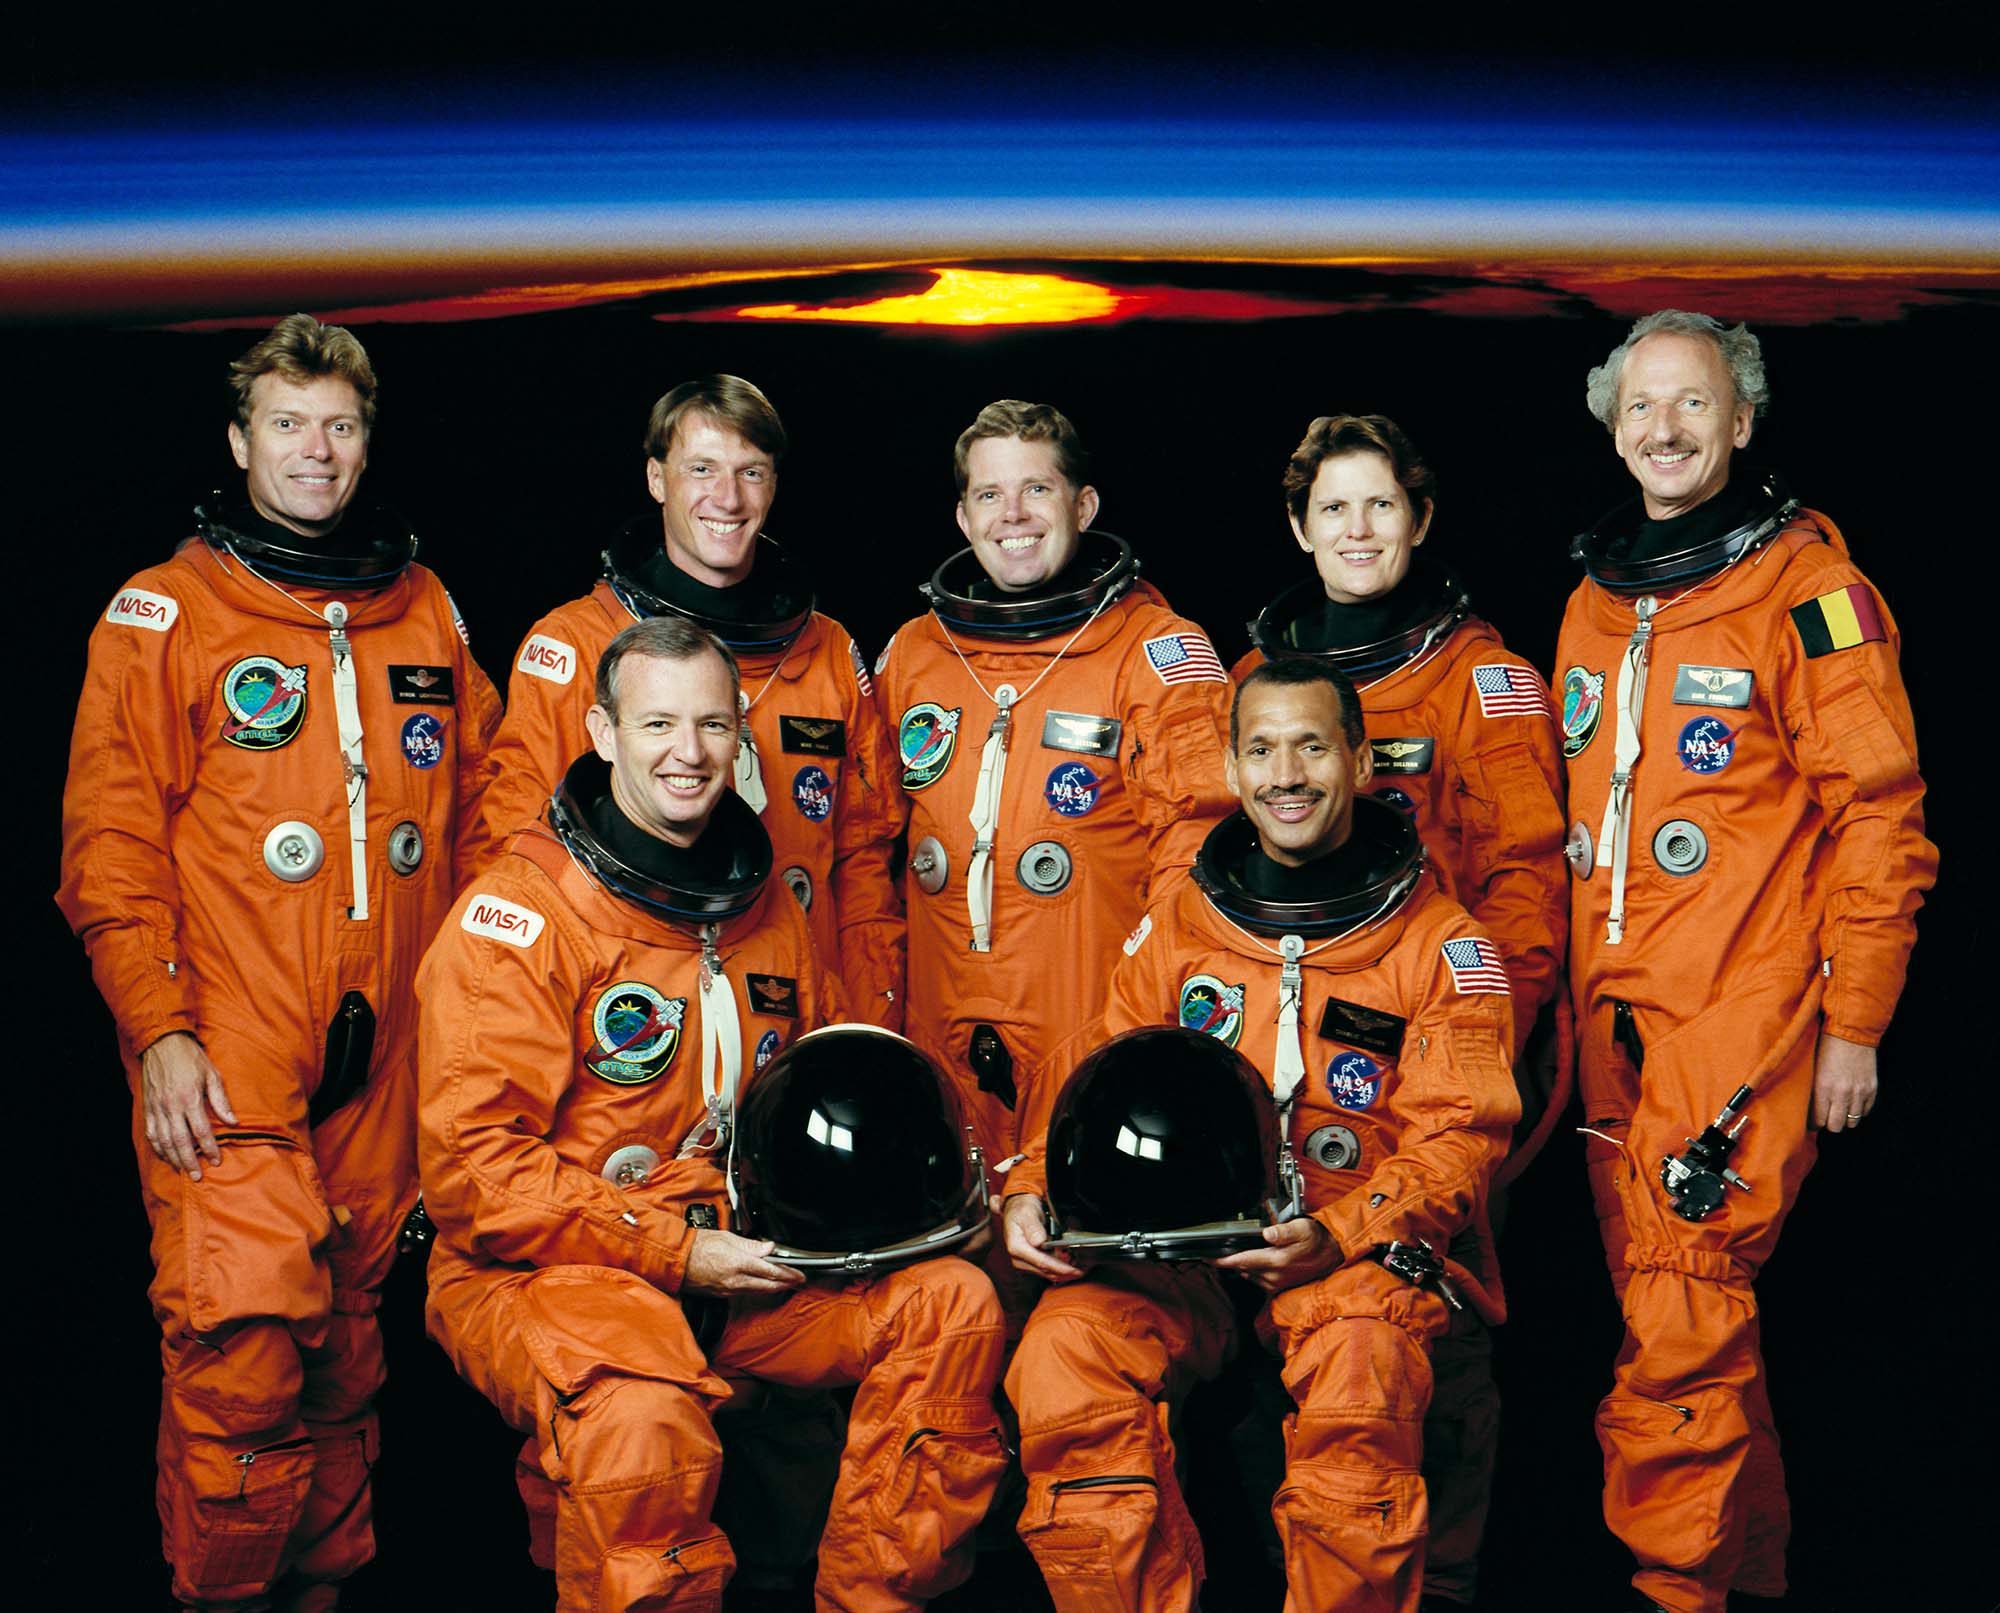 STS45 crew including Louth's Michael Foale, second left, back row.